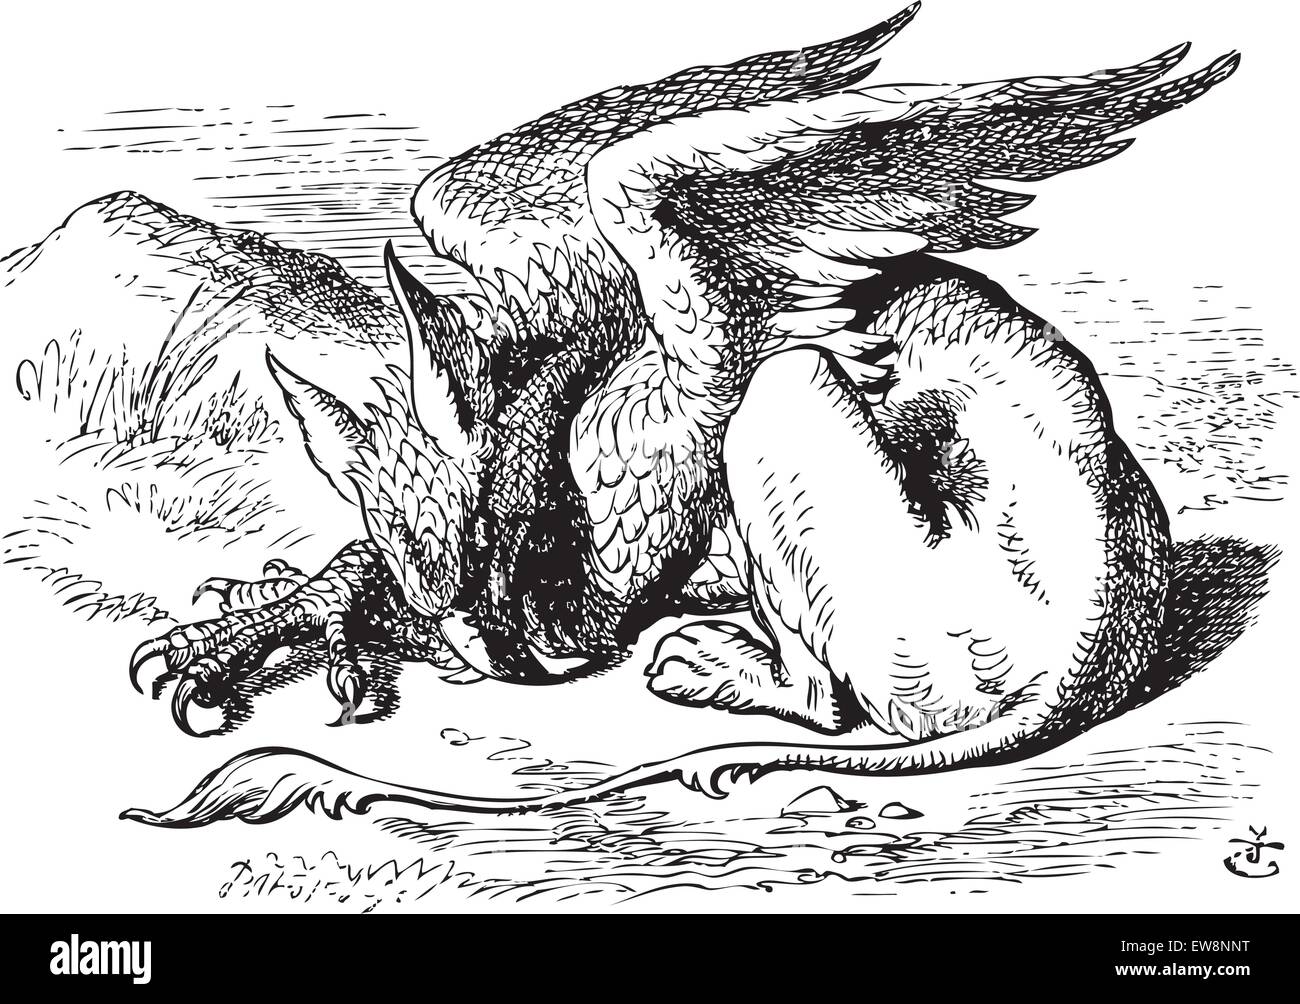 The Sleeping Gryphon - Alice in Wonderland original vintage engraving. They very soon came upon a Gryphon, lying fast asleep in the sun. Illustration from John Tenniel, published in 1865. Stock Vector